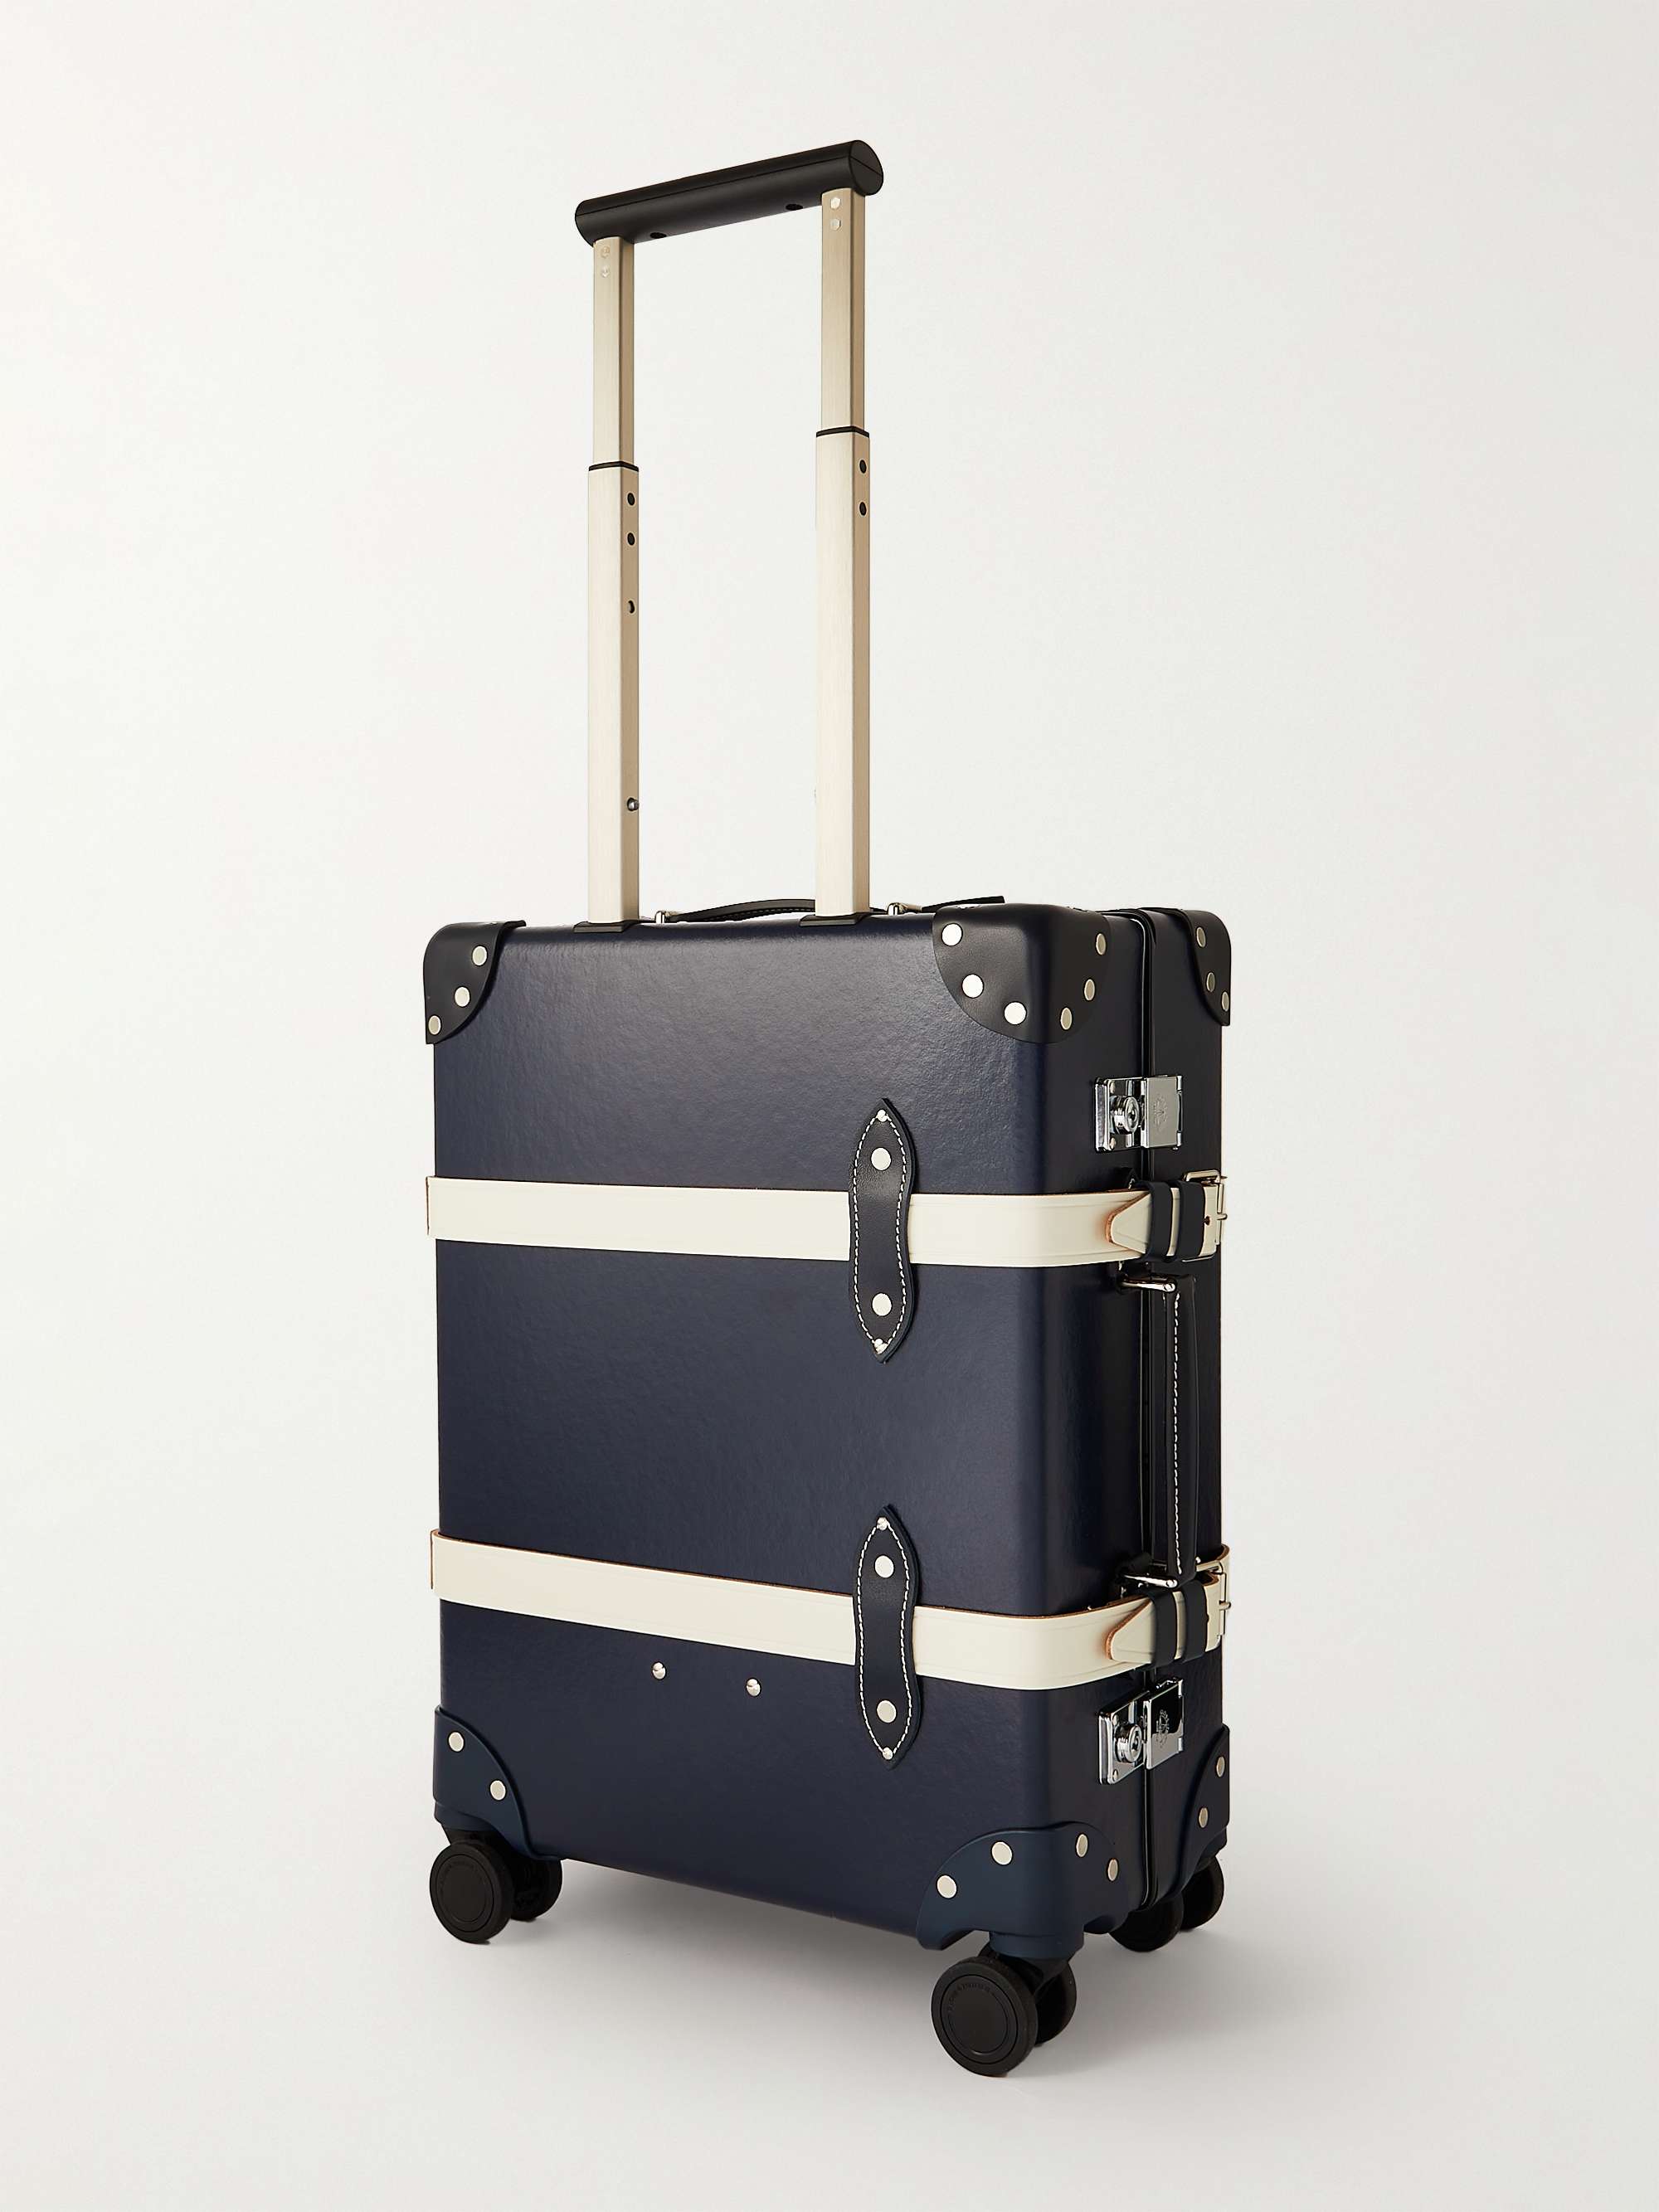 GLOBE-TROTTER Centenary Leather-Trimmed Carry-On Suitcase